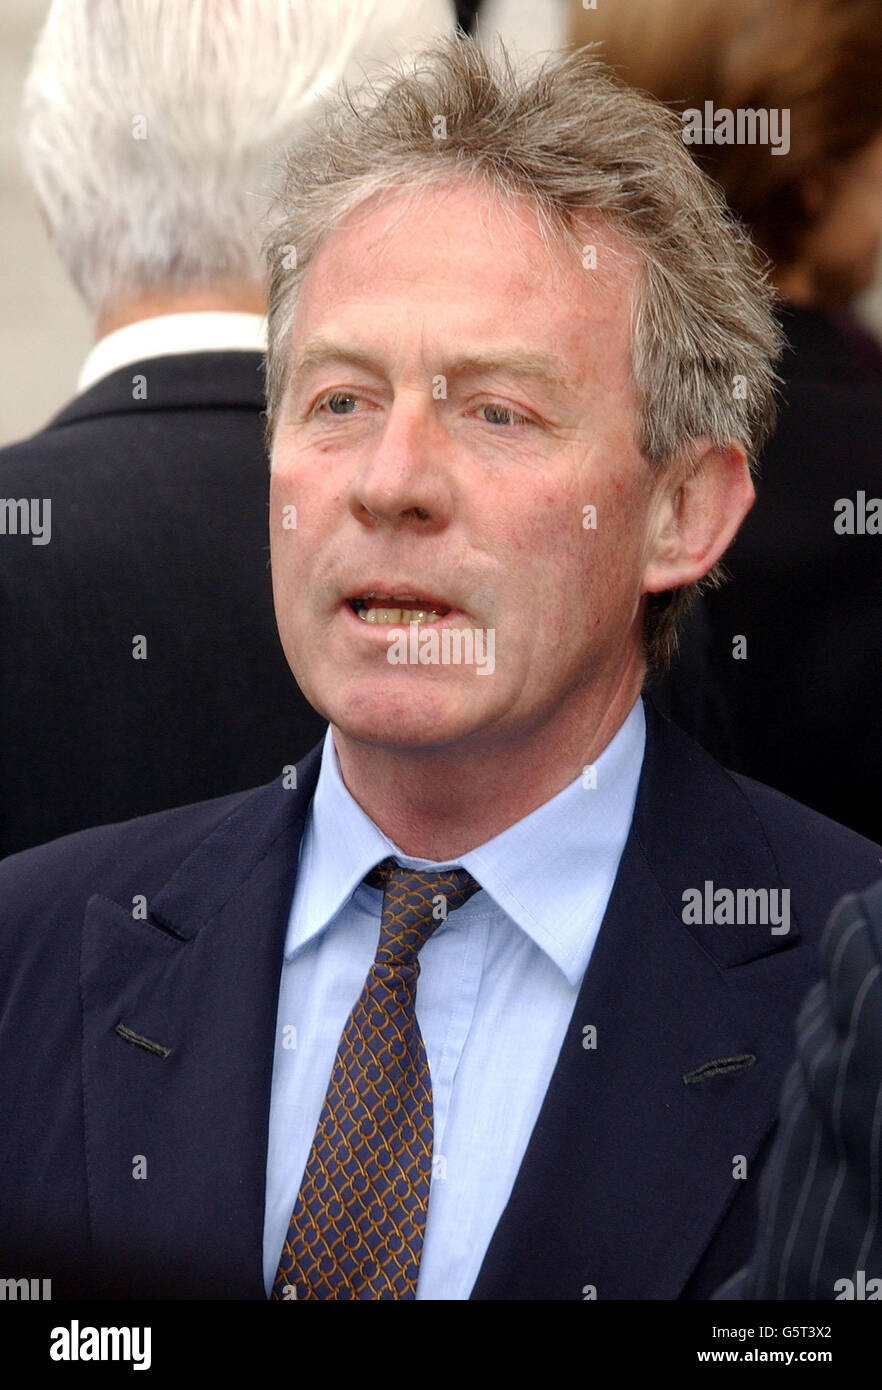 Roddy Llewellyn, former boyfriend of Princess Margaret arrives for her memorial service at Westminster Abbey, London. Princess Margaret, the younger sister of Britain's Queen Elizabeth II, died on February 9, aged 71. Stock Photo